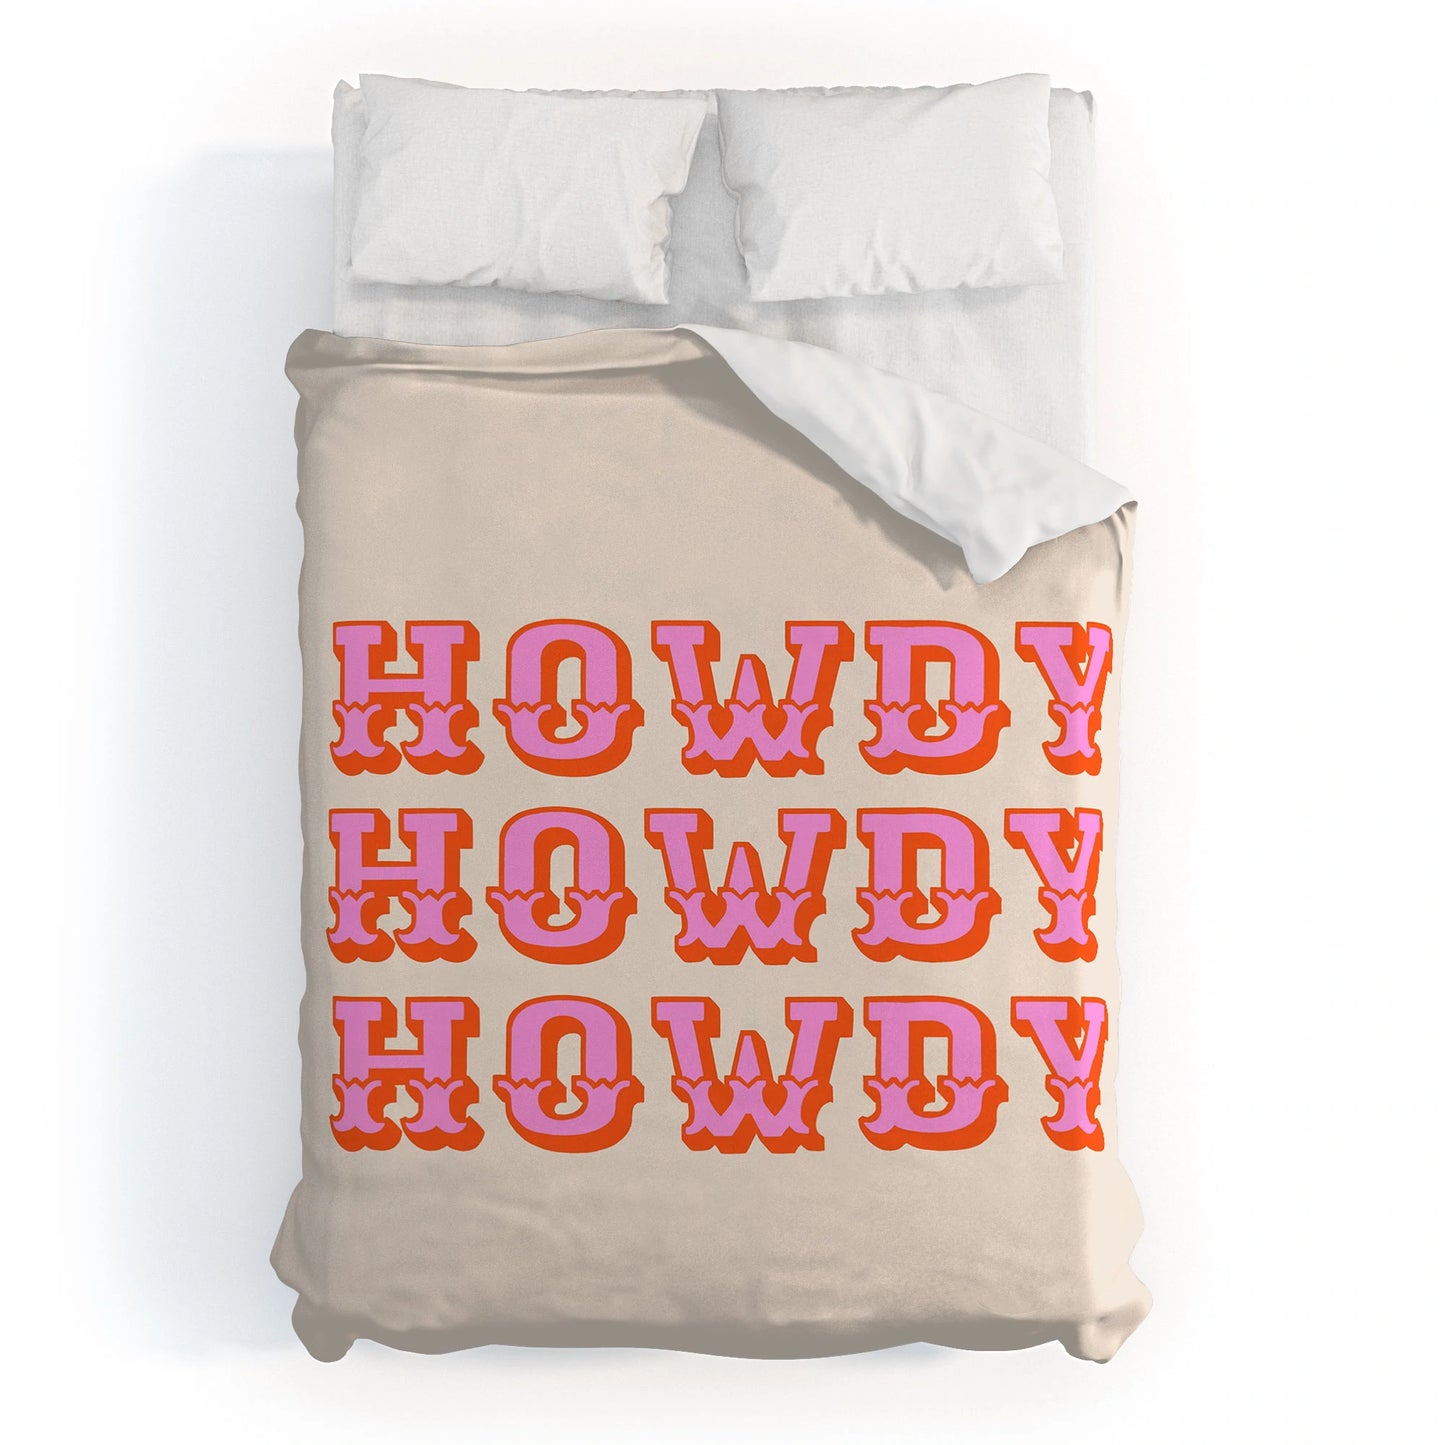 HOWDY Duvet Cover - bedding, beddinng, bedspread, blanket, comforter, cover, cowgirl, cowgirl style, cowgirlstyle, decor, duvet, home decor, homedecor, ranch, southwestern, western, western bedding, western decor, western home decor, westernbedding, westerndecor, westernhomedecor -  - Baha Ranch Western Wear